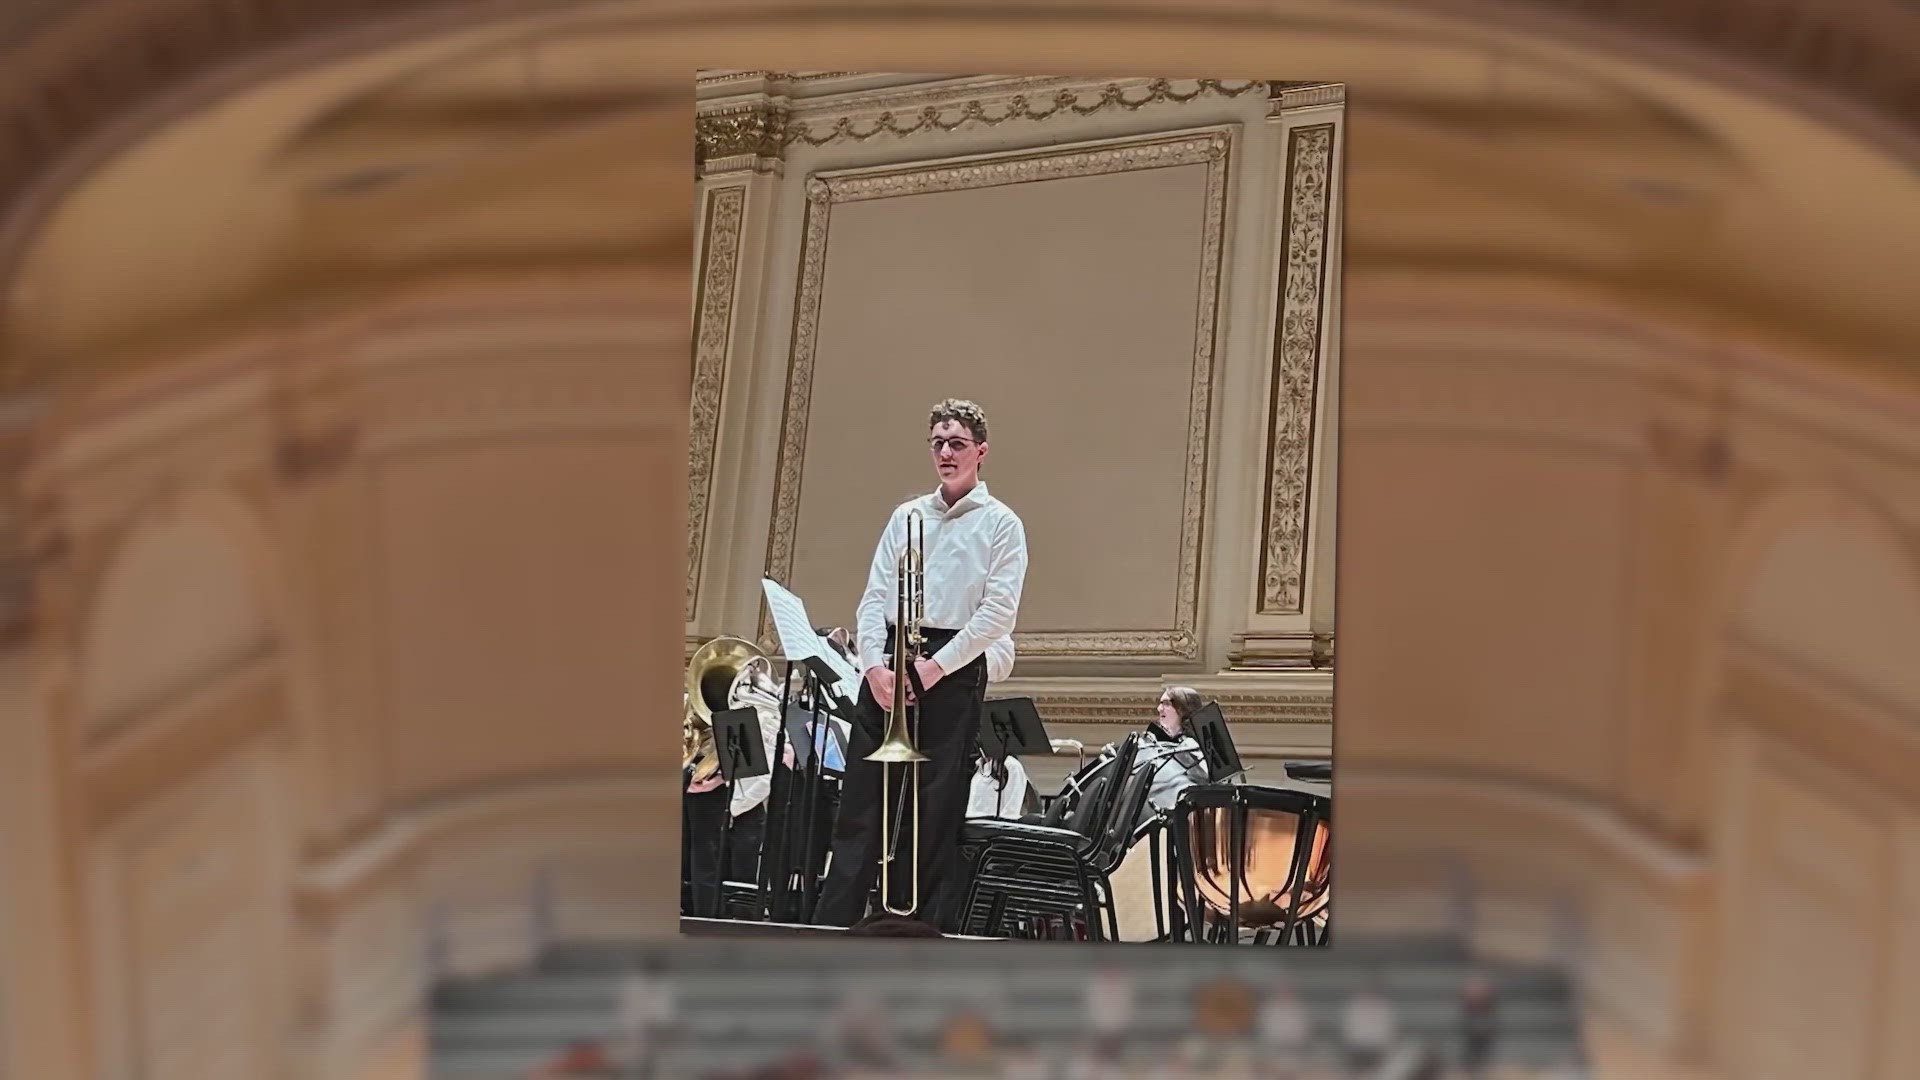 Connor West may have nabbed three solos at Carnegie Hall, but it means nothing to him without those who supported his Boerne journey.